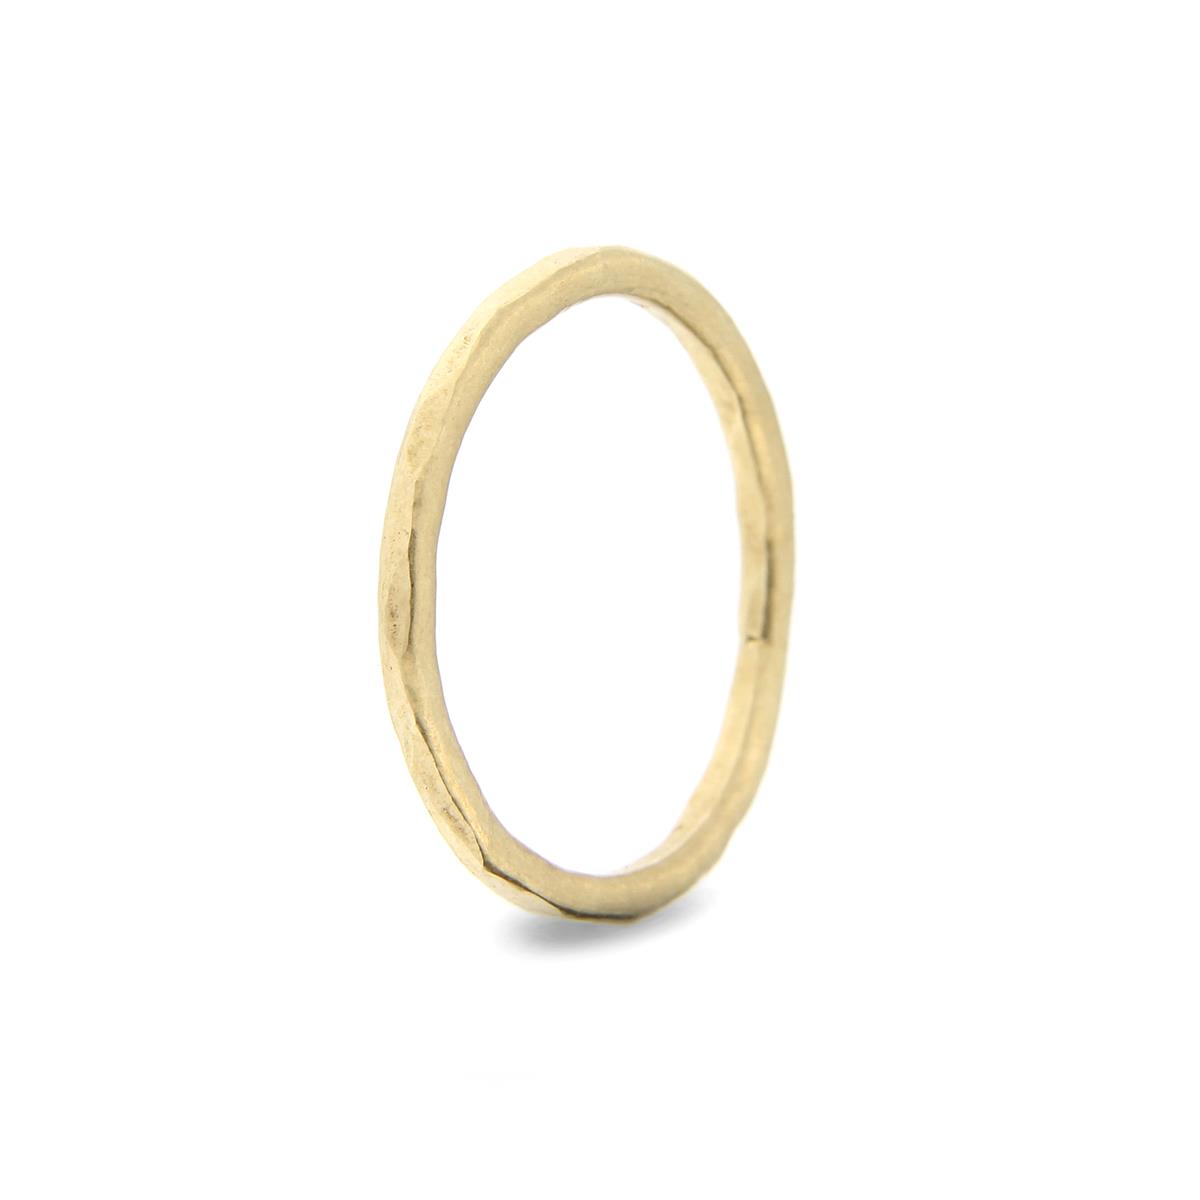 Katie g. Jewellery - Hammered Ring 1,5mm - Champ Gold